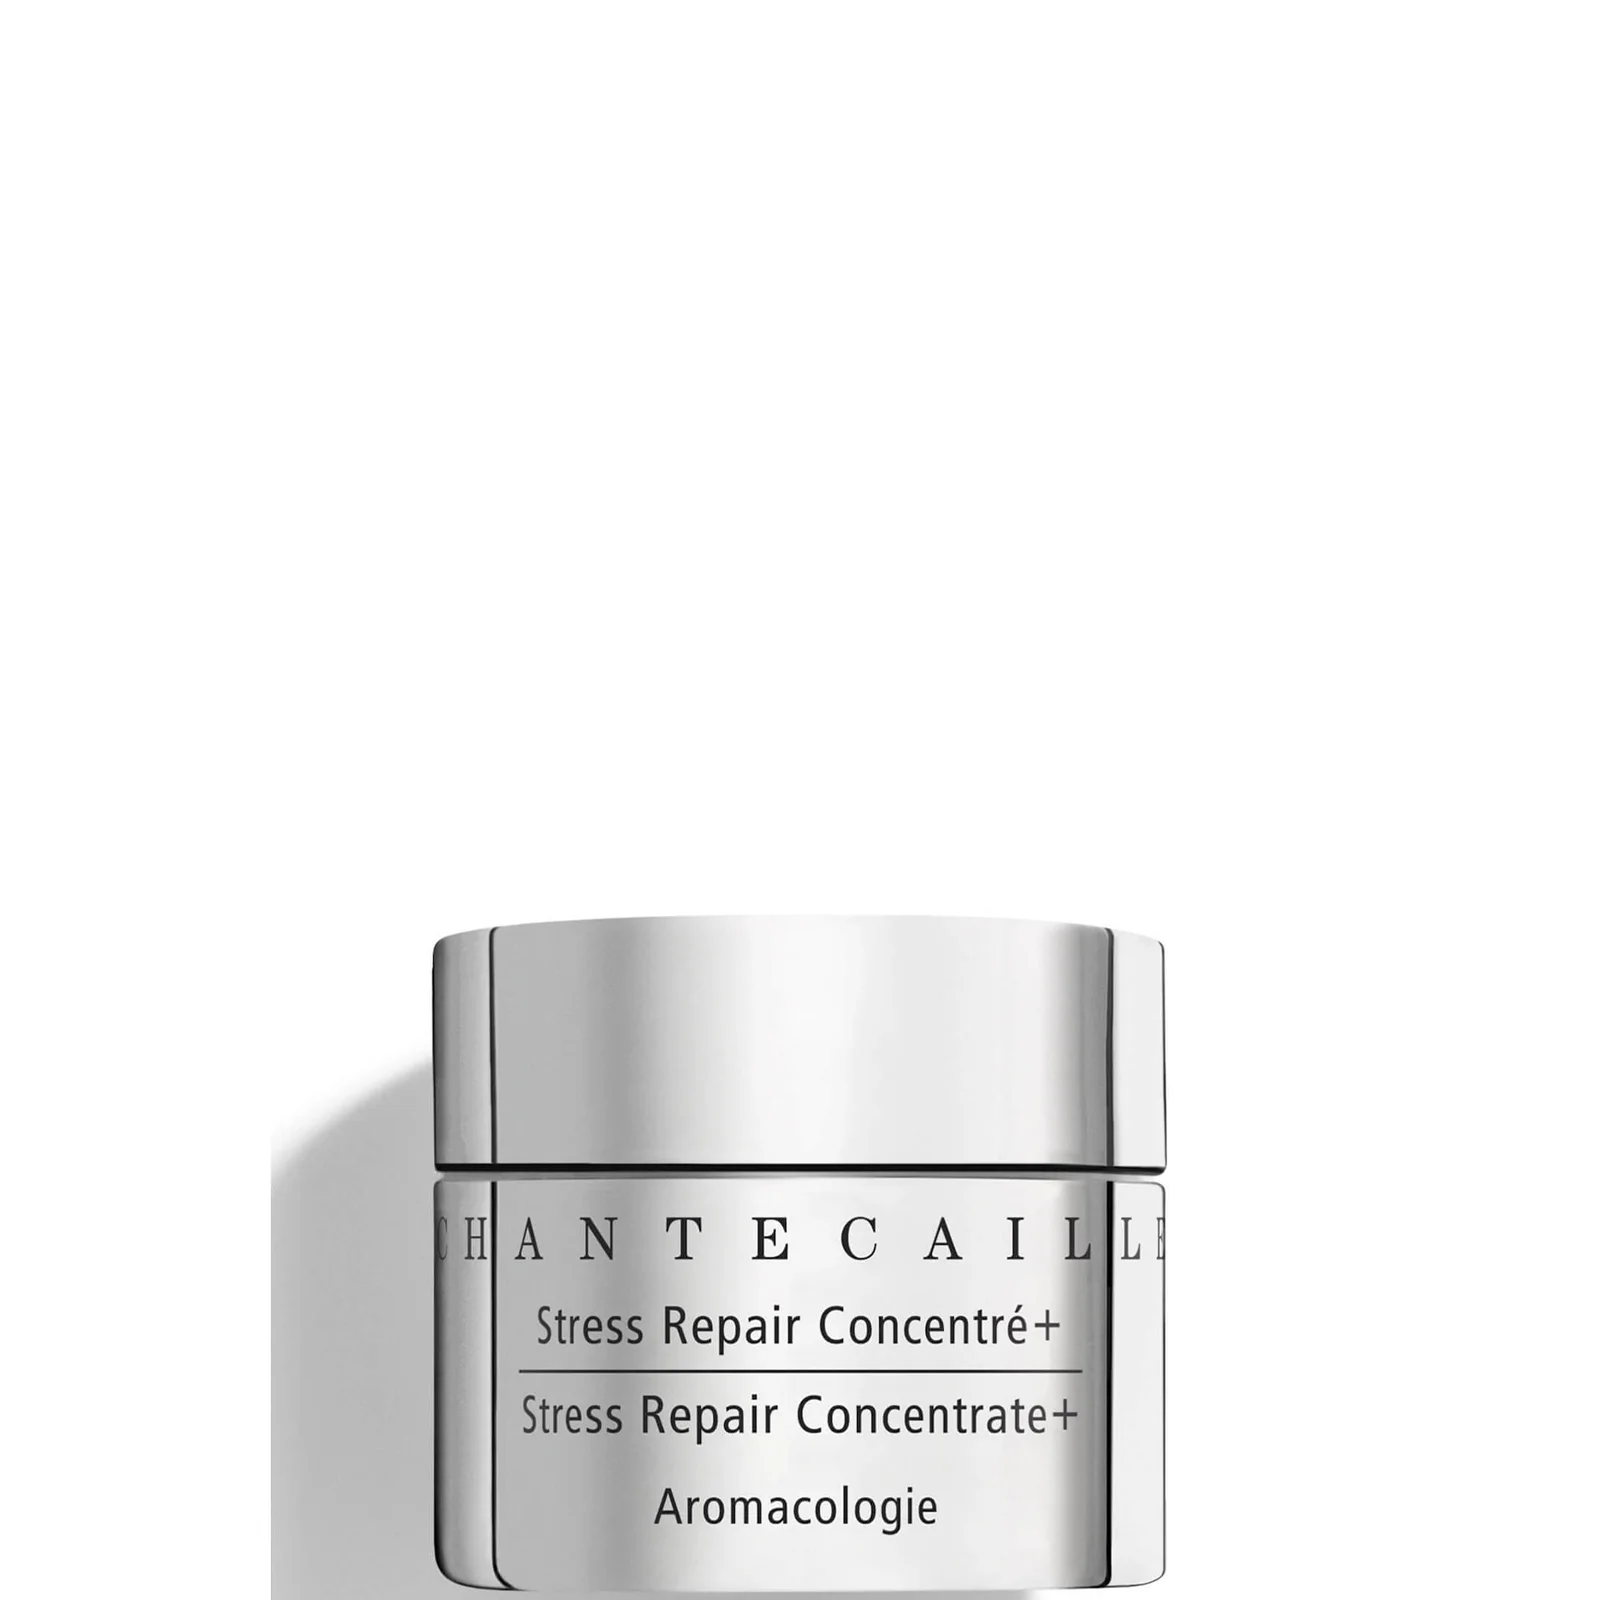 Chantecaille Stress Repair Concentrate+ 15ml Image 1